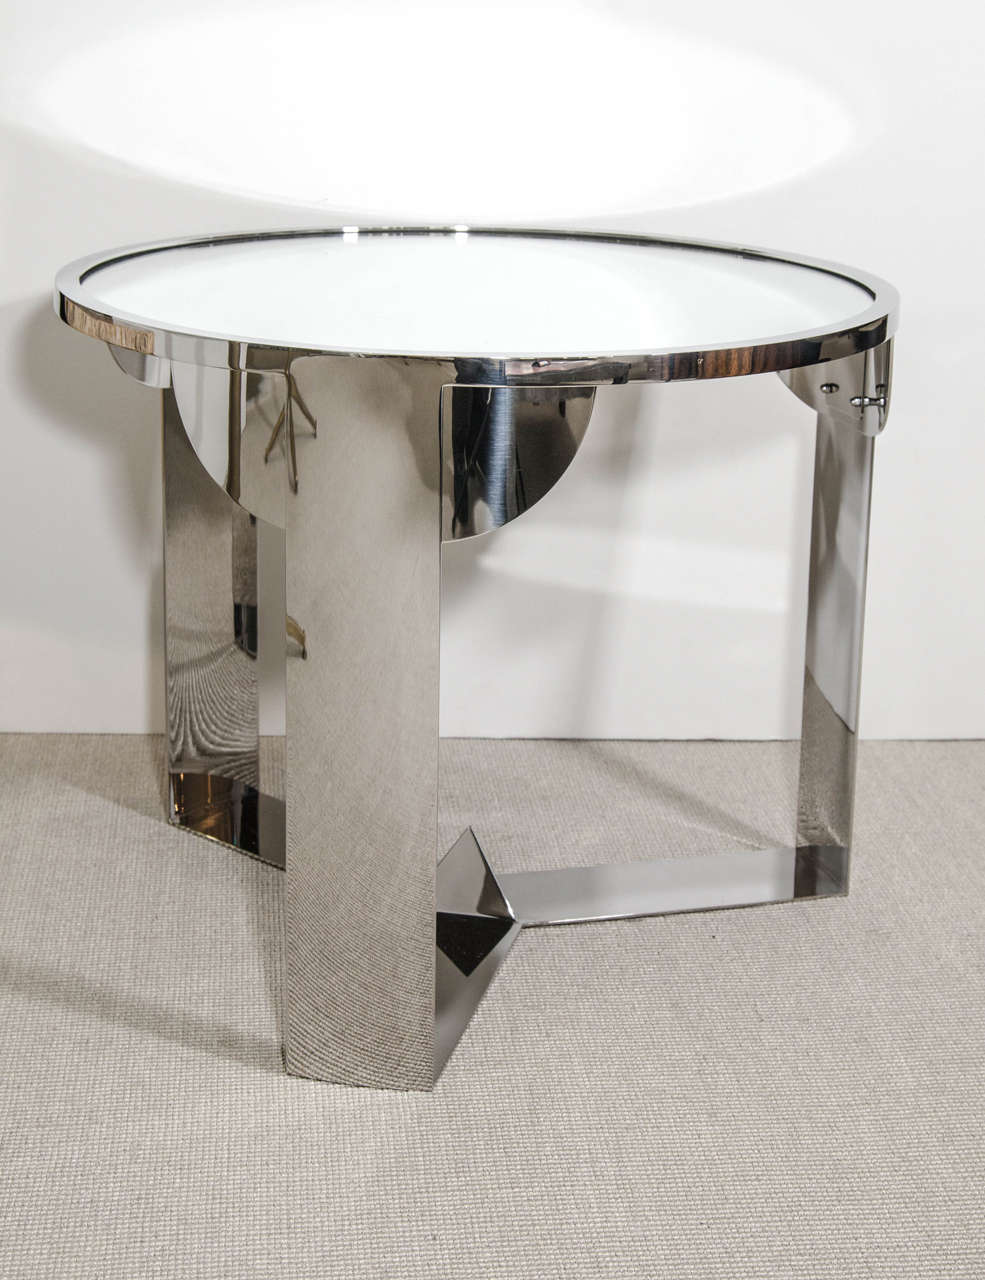 Limited Edition Constructivist Inspired Custom-Made Table by Eric Appel, USA In Excellent Condition For Sale In New York, NY